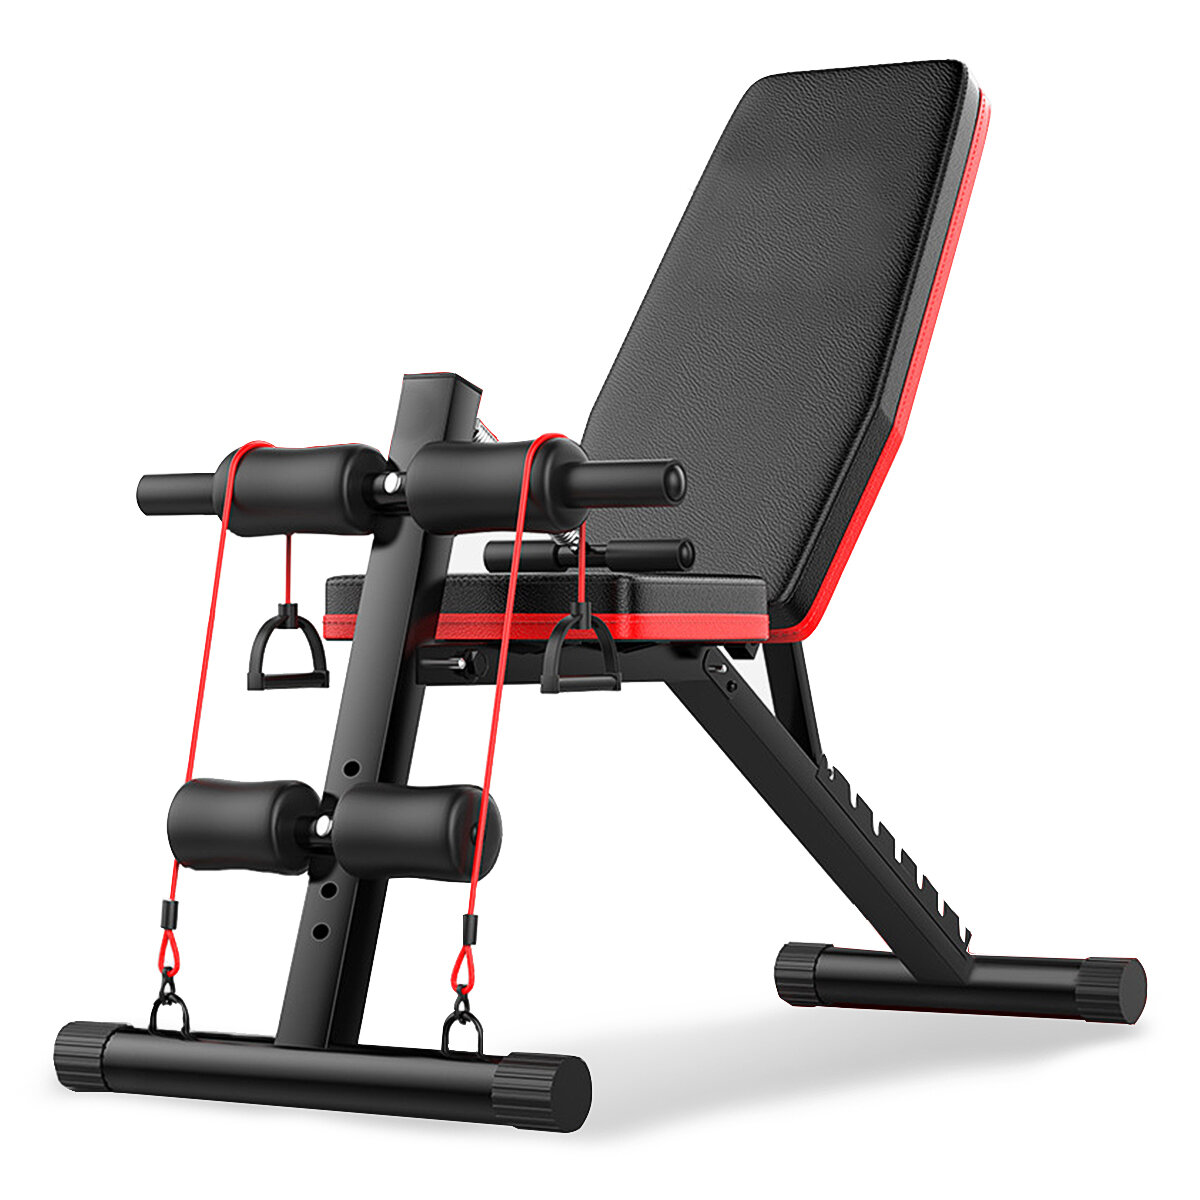 best price,300kg,bearing,multifunctional,foldable,dumbbell,bench,eu,discount